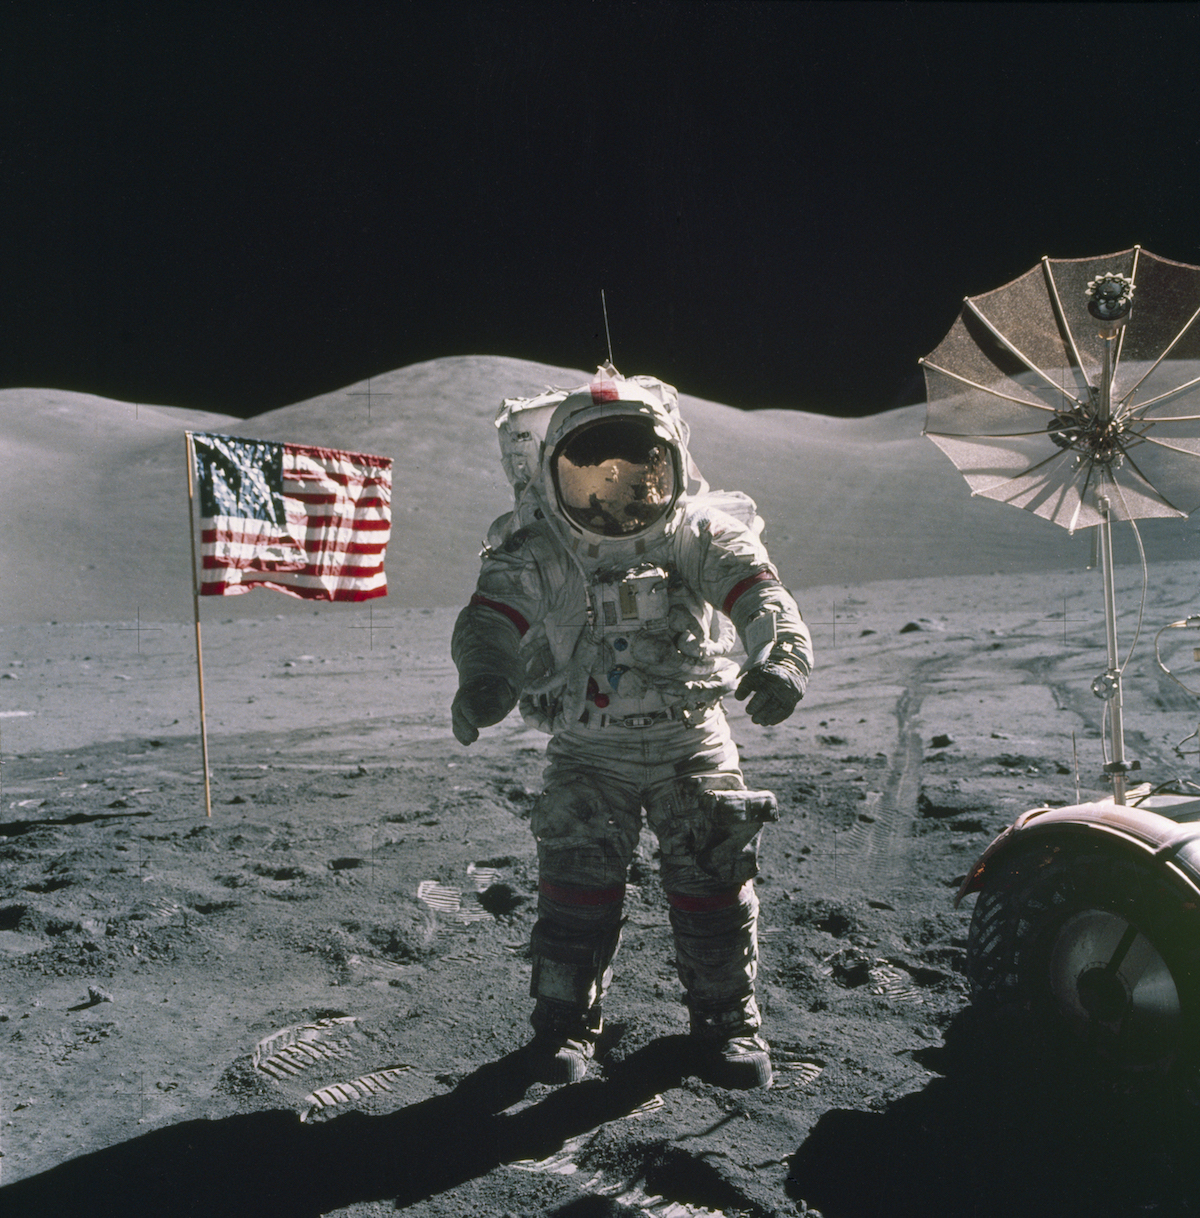 astronaut standing on the lunar surface by flag and rover